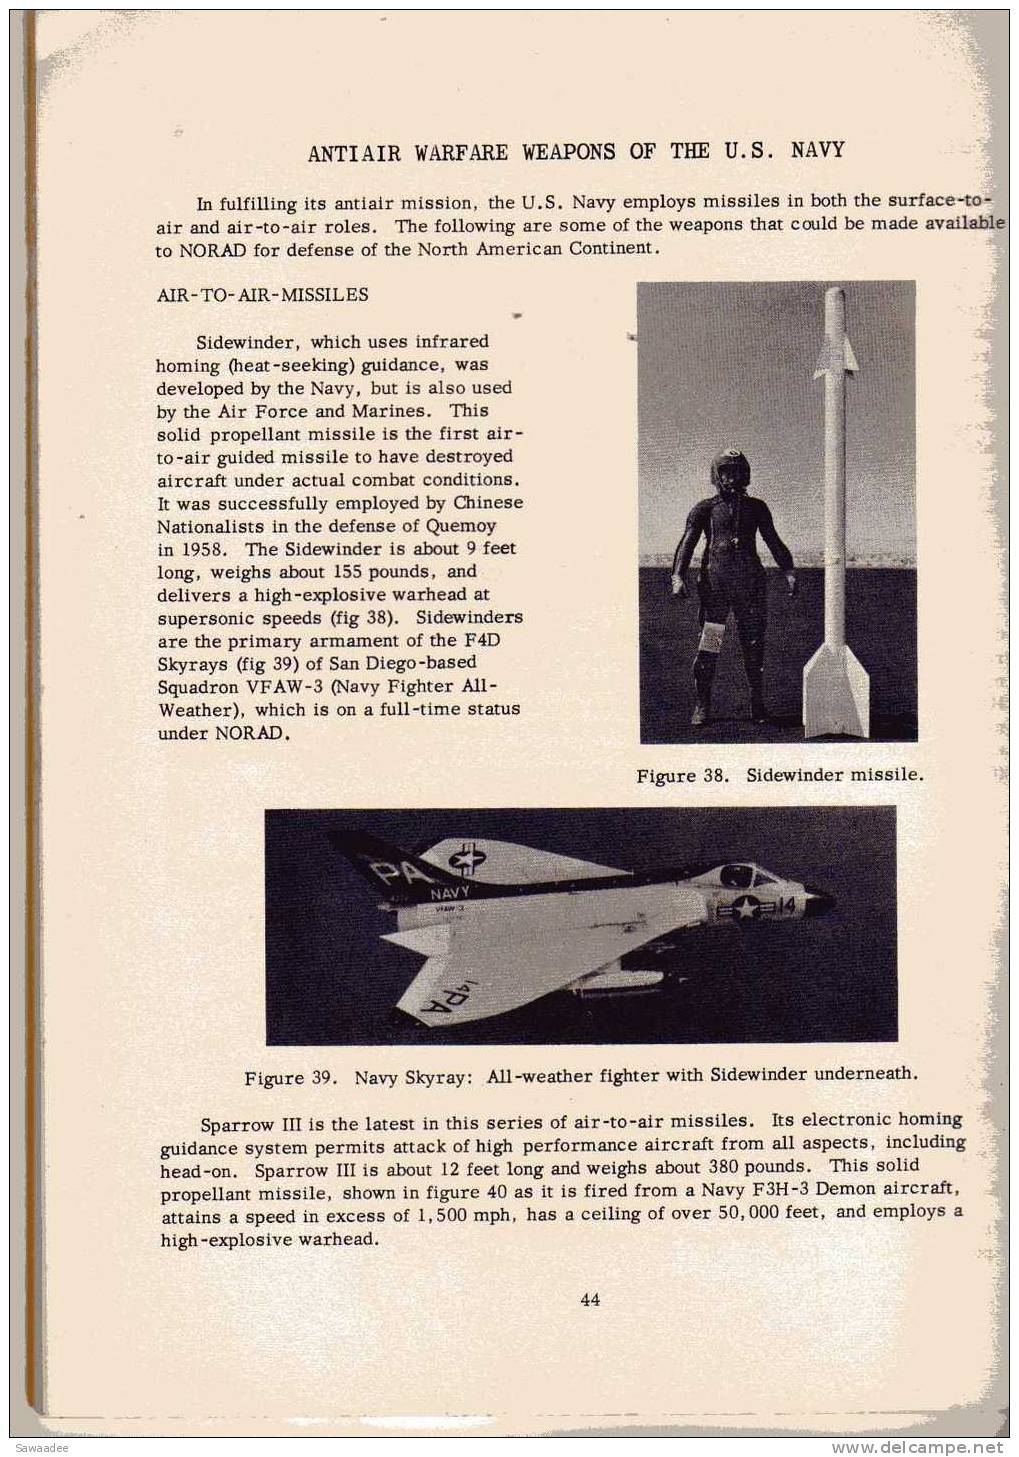 DOCUMENT - MILITARIA  - U.S. ARMY AIR DEFENSE -  FORT BLISS - TEXAS - 1962/63 - 78 PAGES - NBRES ILLUSTRATIONS, PHOTOS - Wars Involving US